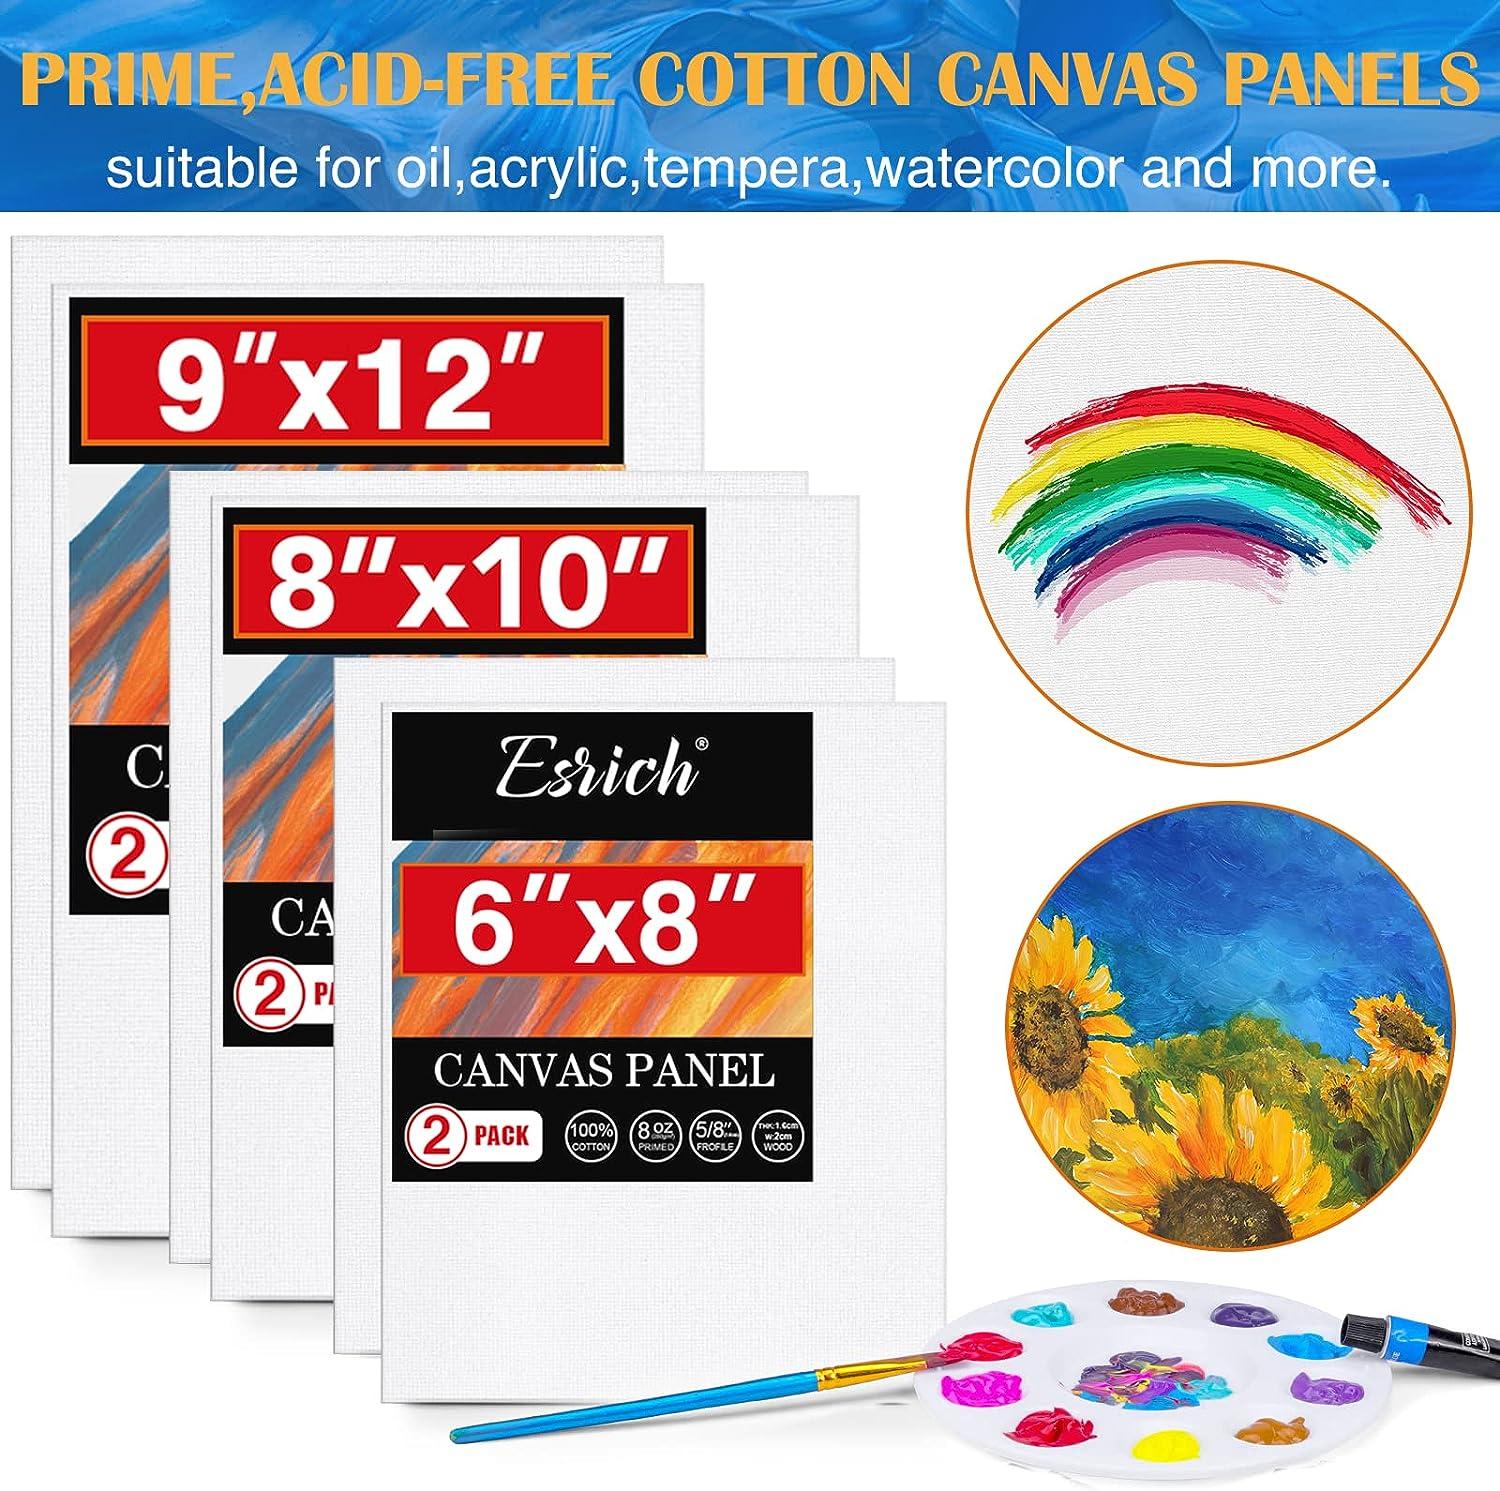 Art Paint Set for Kids, Painting Supplies Kit with 5 Canvas Panels, 8  Brushes, 12 Acrylic Paints, Multi-Function Table Easel, Etc, Premium  Acrylic Paint Set for Students, Kids and Beginner.